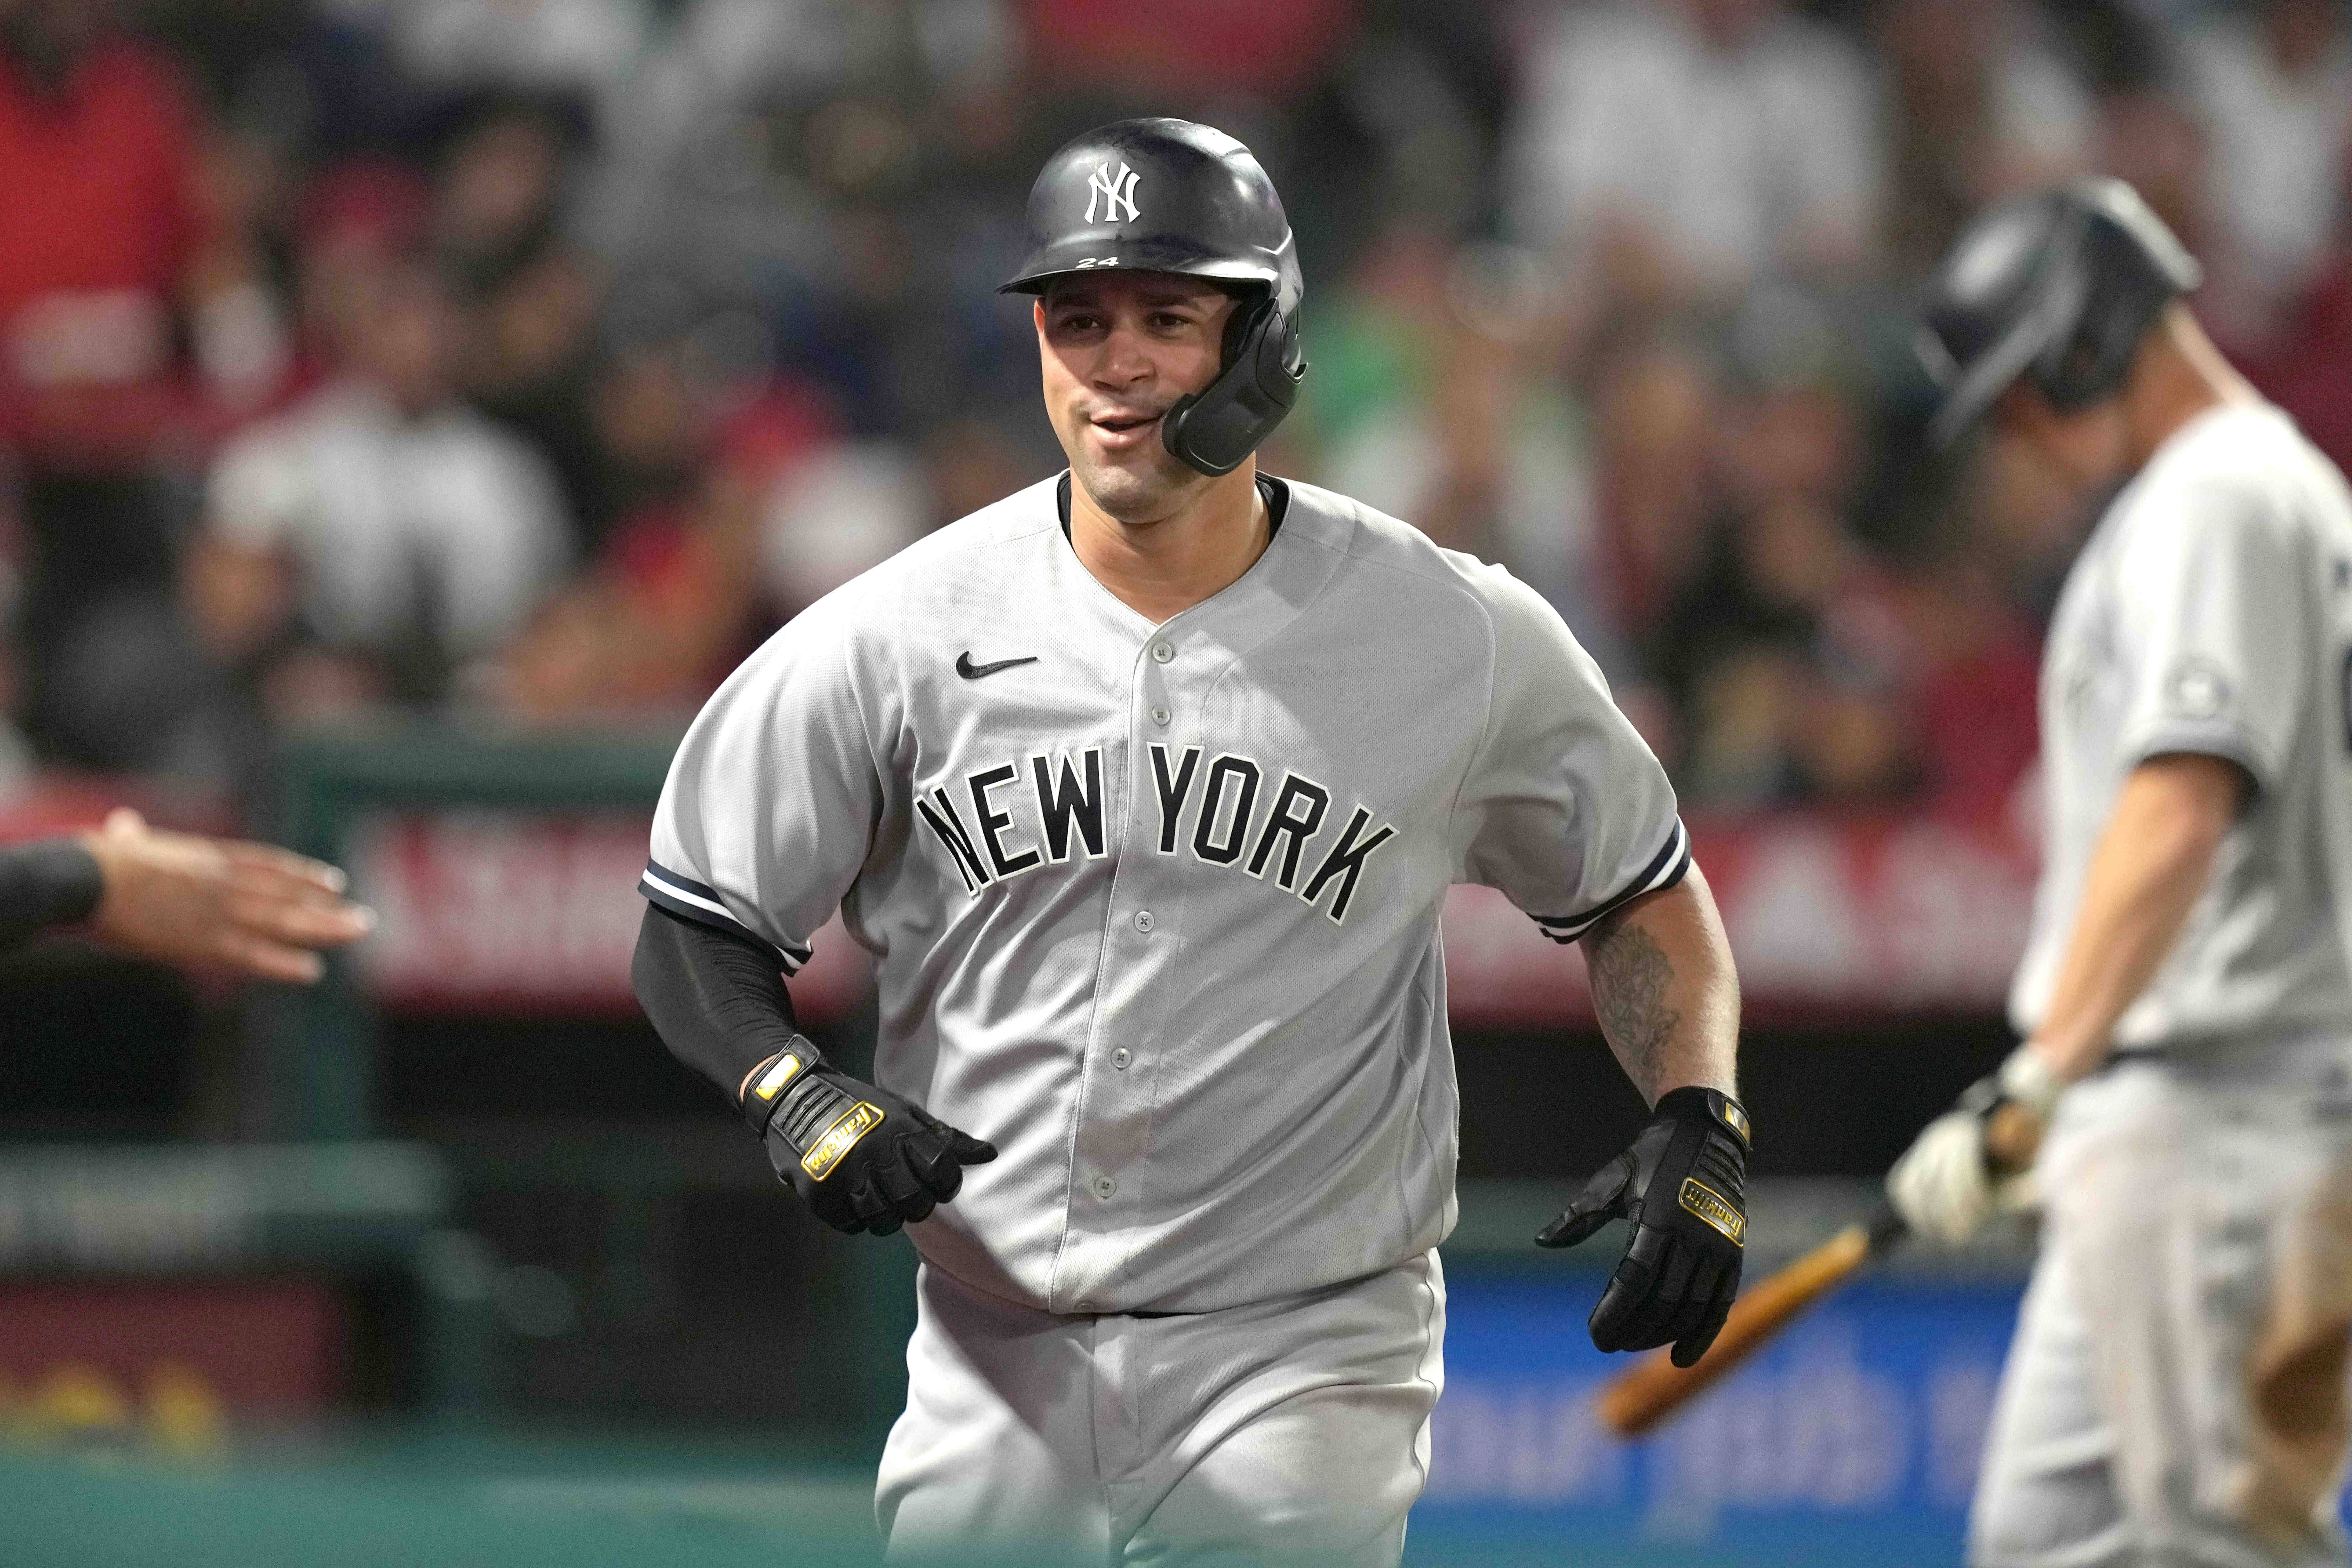 Gary Sanchez signs minor league contract with San Francisco Giants